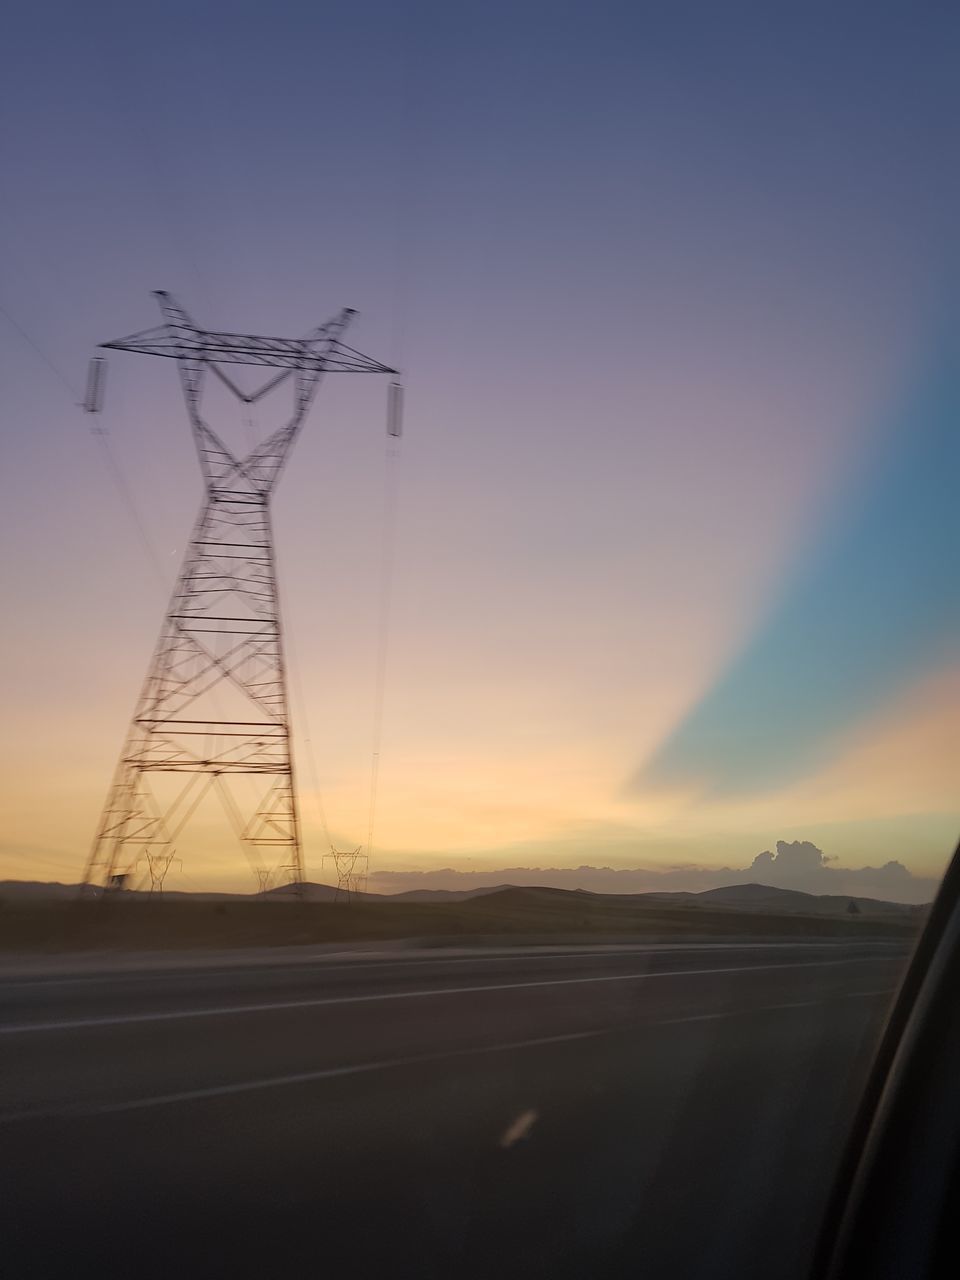 SILHOUETTE ELECTRICITY PYLON AGAINST SKY AT SUNSET